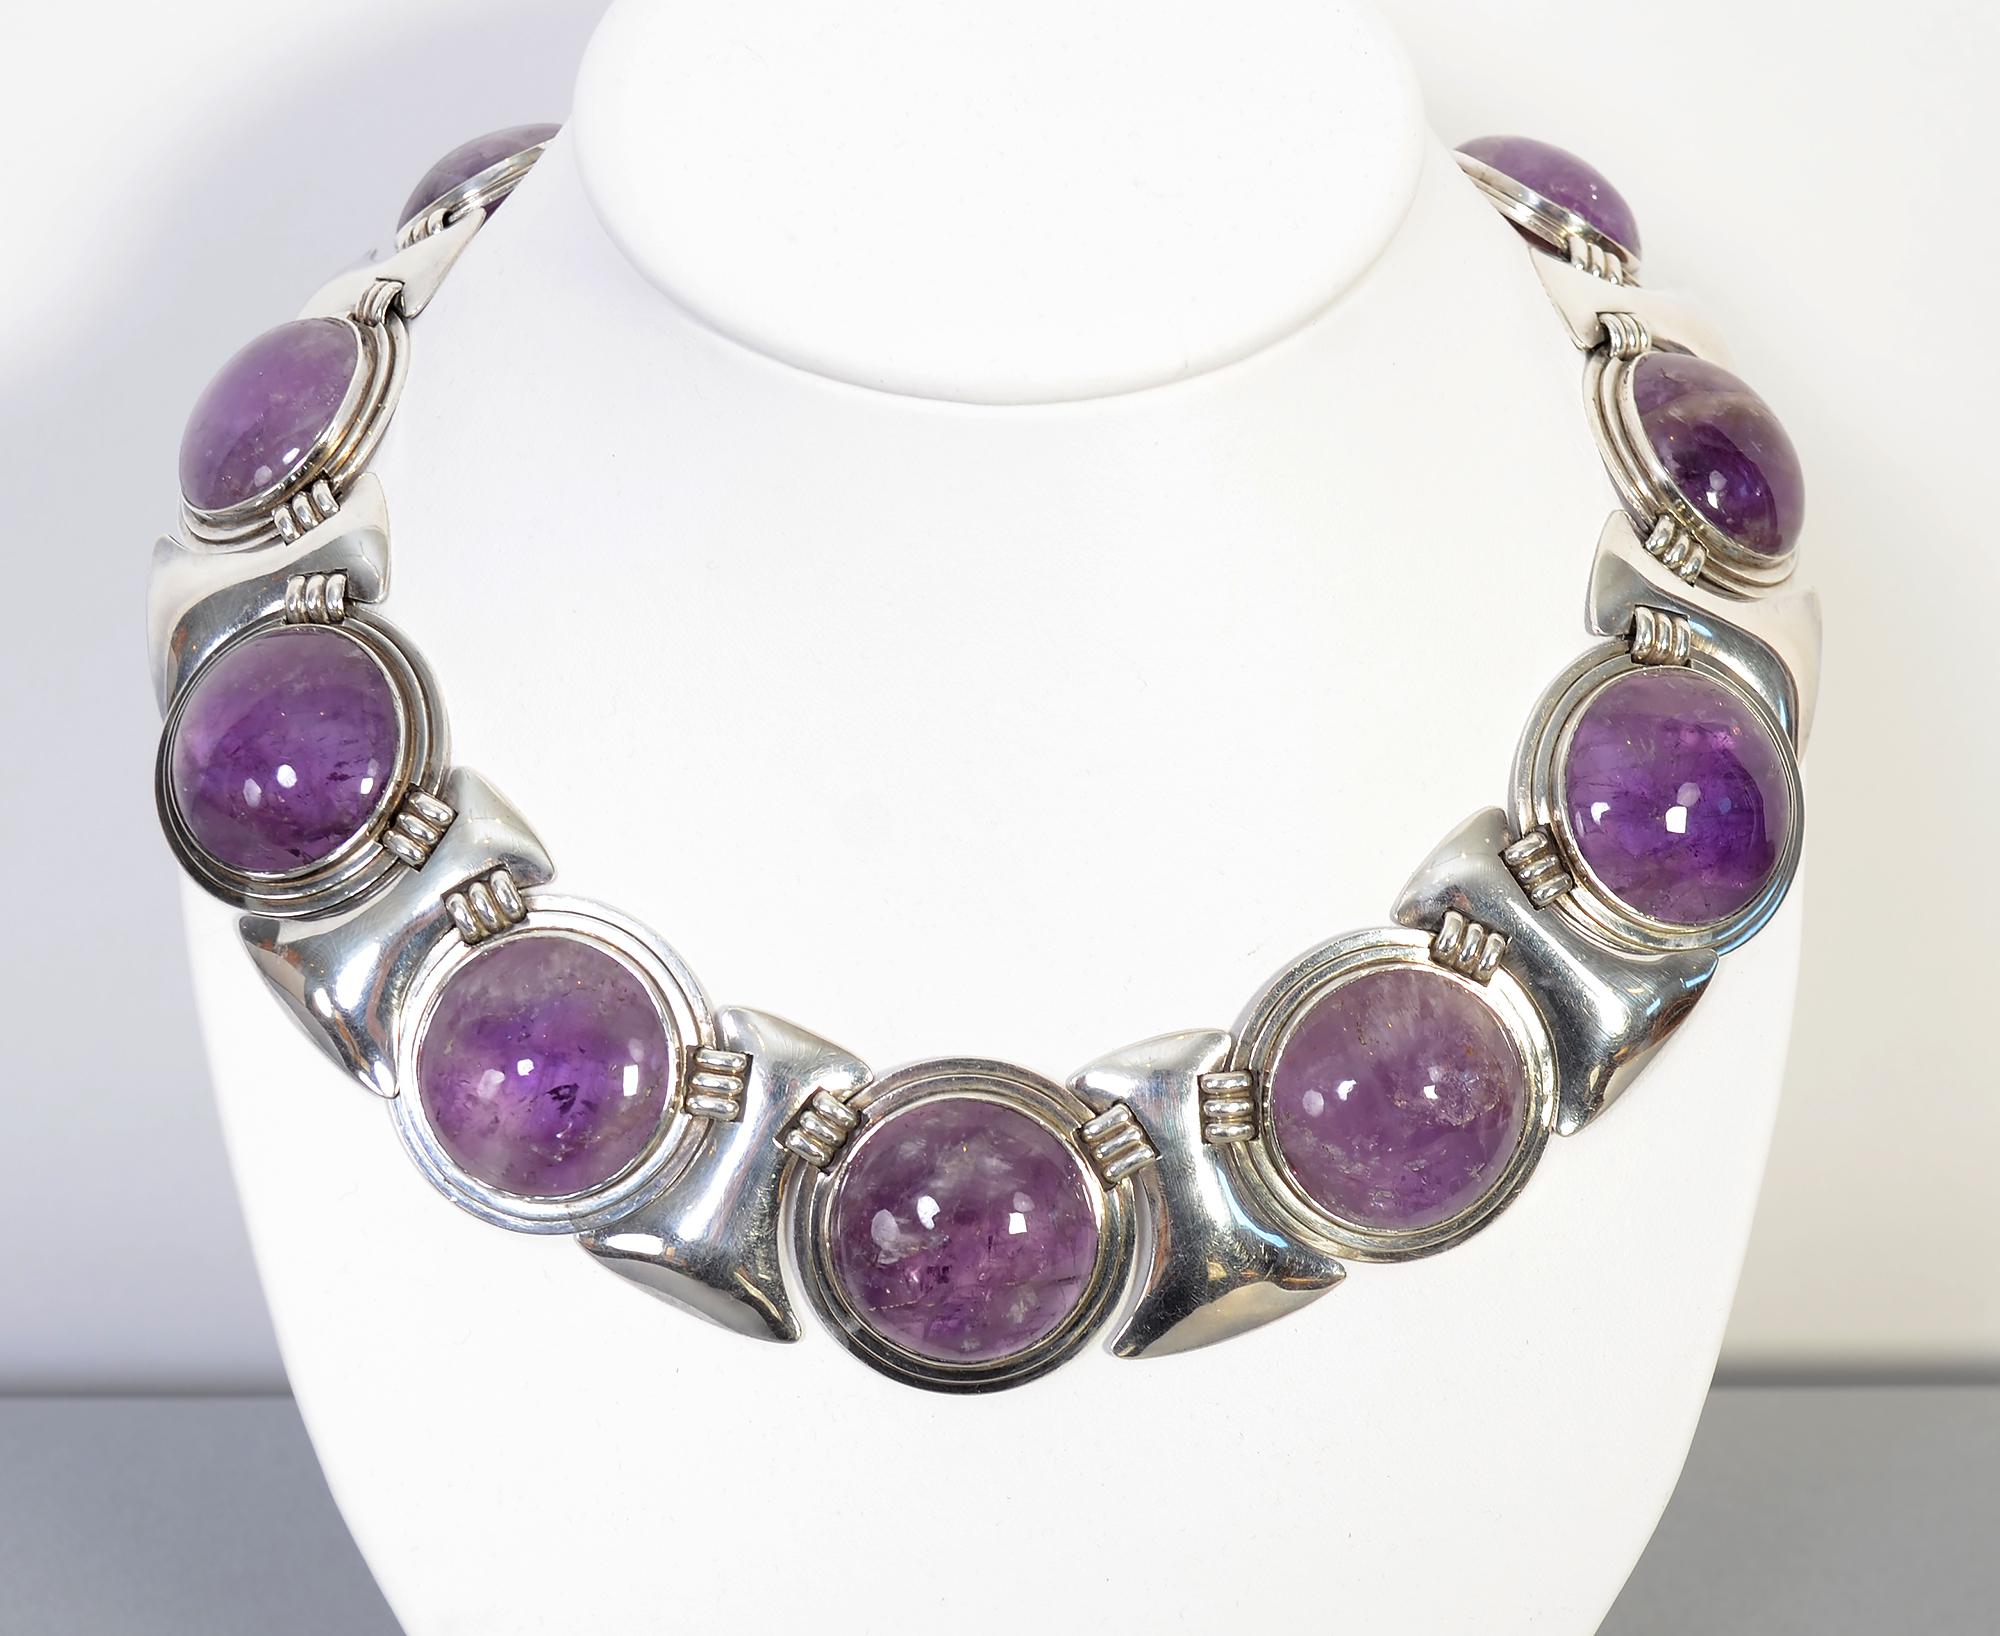 This silver and amethyst circles necklace by Fred Davis is one of his iconic designs. What makes this example stand out is the exceptional size. It is much larger than the standard. Each round disc is 1 1/2 inches in diameter making for a very